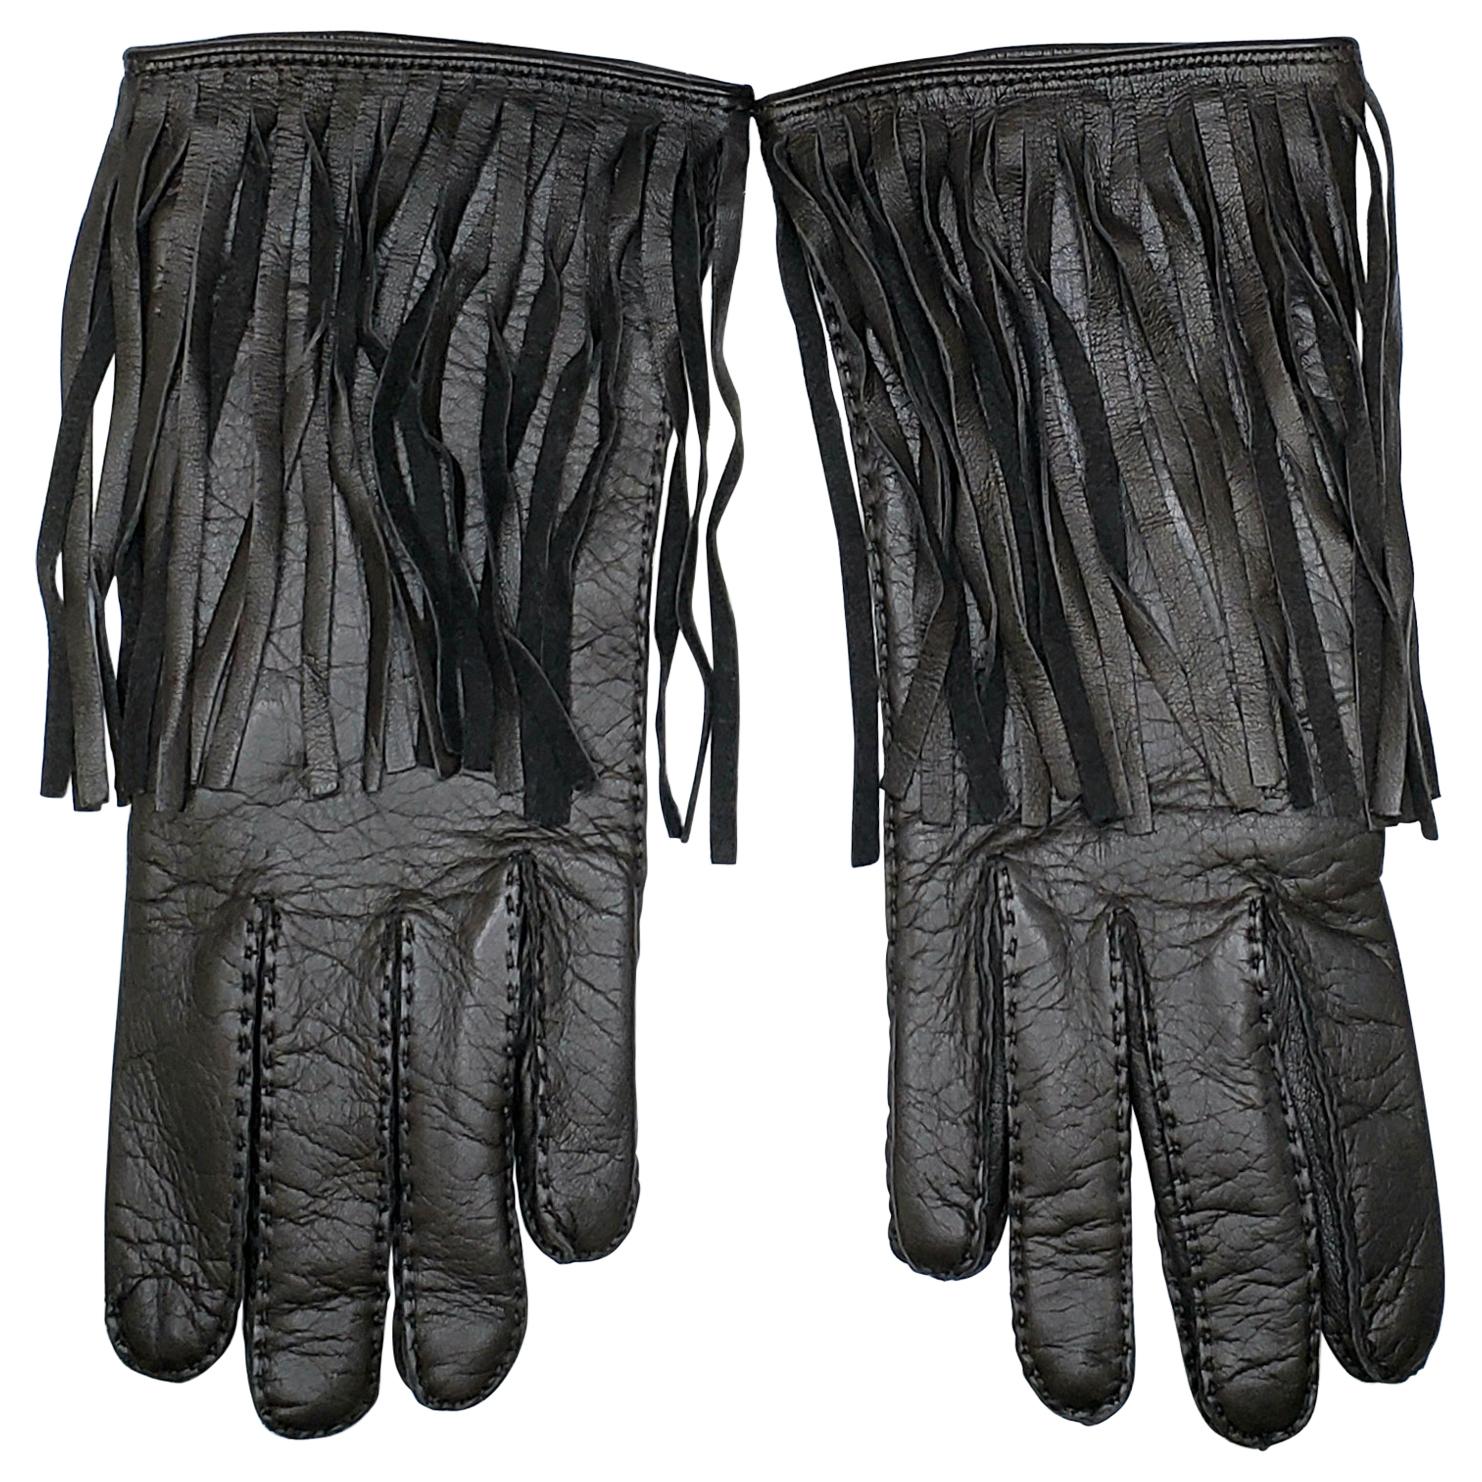 NEW VERSACE BROWN LEATHER GLOVES w/ FRINGE size S, M